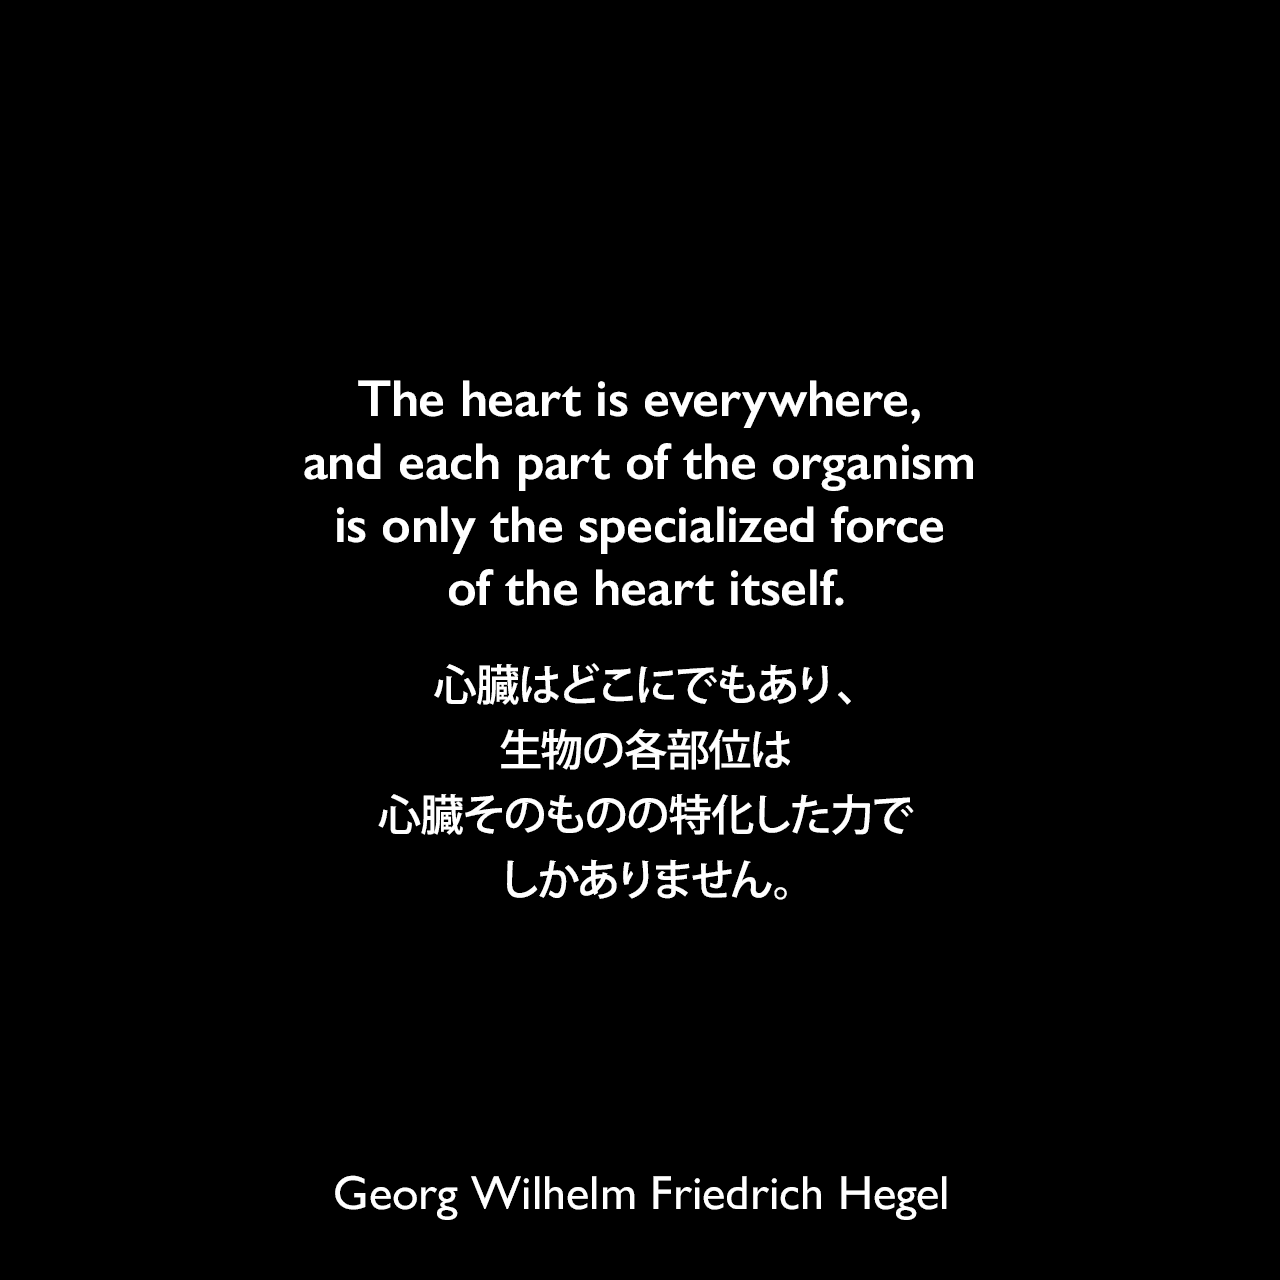 The heart is everywhere, and each part of the organism is only the specialized force of the heart itself.心臓はどこにでもあり、生物の各部位は心臓そのものの特化した力でしかありません。- ヘーゲルによる本「Encyclopedia of the Philosophical Sciences」よりGeorg Wilhelm Friedrich Hegel